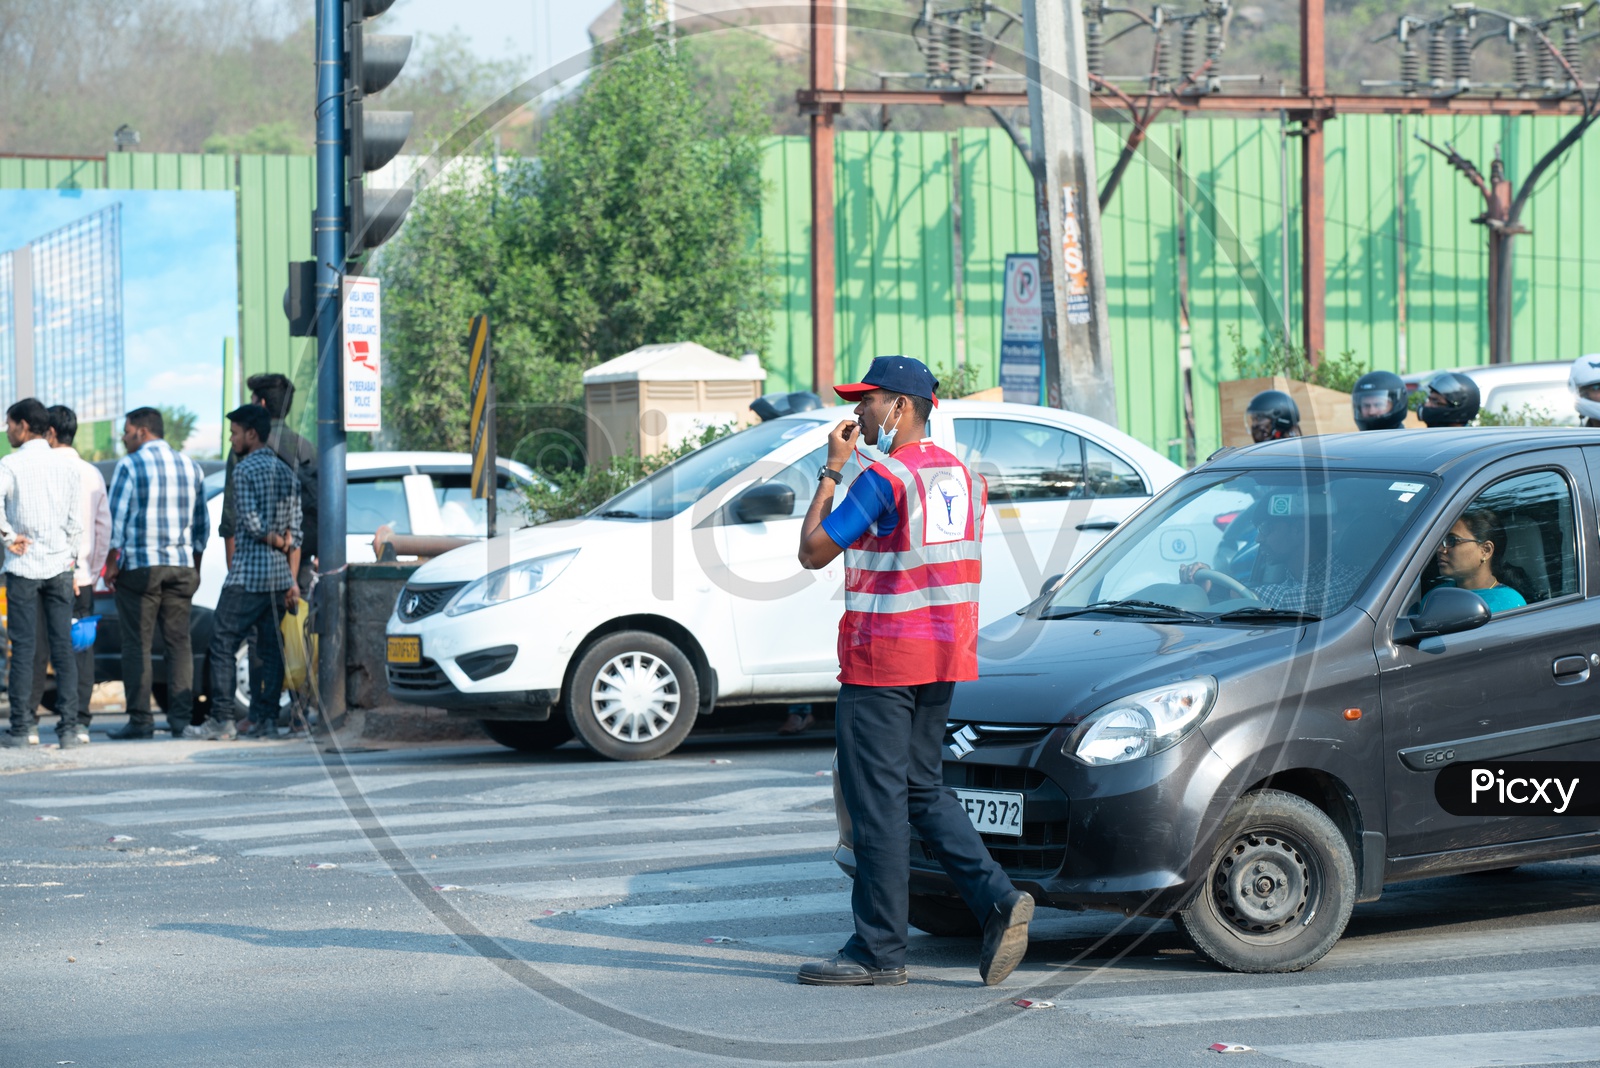 Cyberabad traffic police on duty at a junction